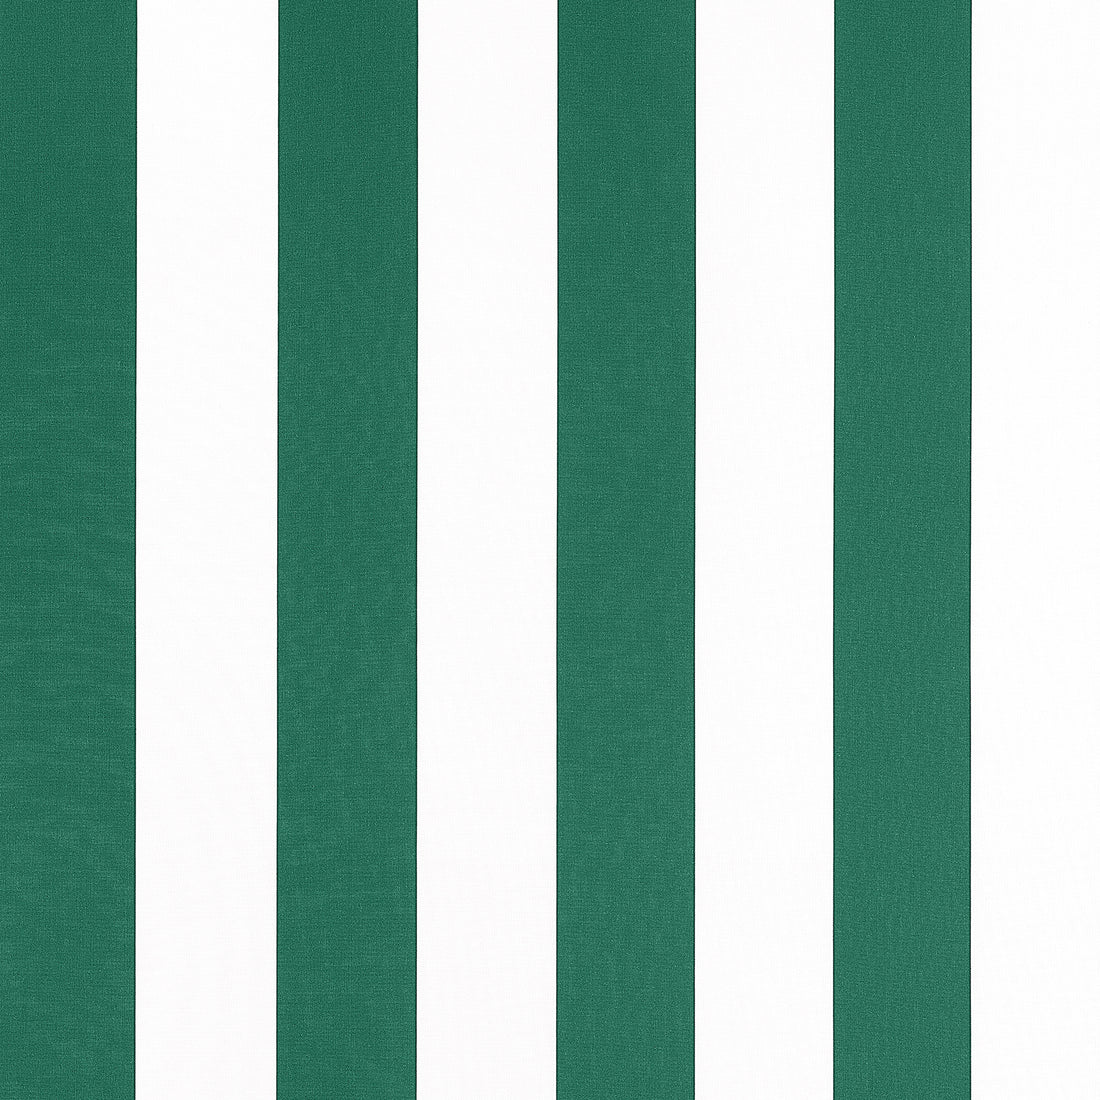 Cabana Stripe fabric in forest color - pattern number W81637 - by Thibaut in the Locale collection